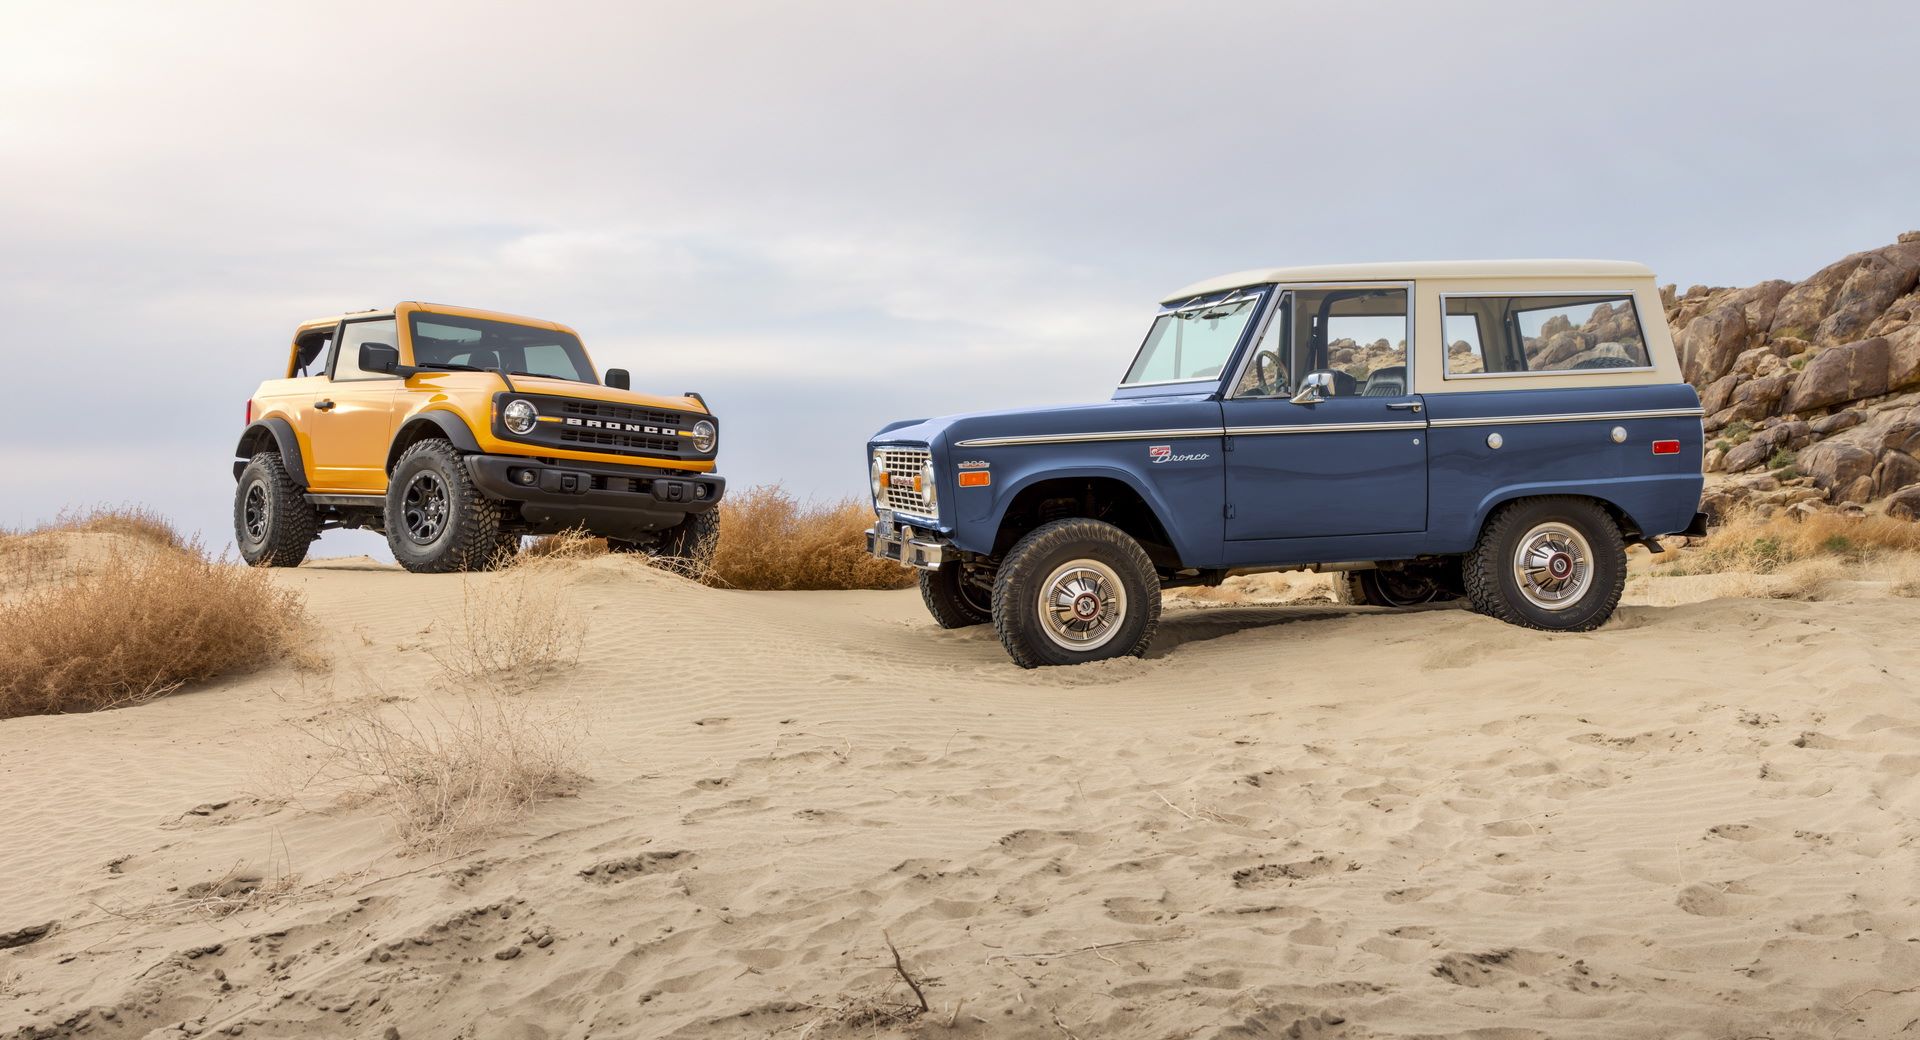 Pre-production 2021 Bronco two-door SUV takes its rugged off-road design cues from the first-generation Bronco, the iconic 4x4 that inspired generations of fans.